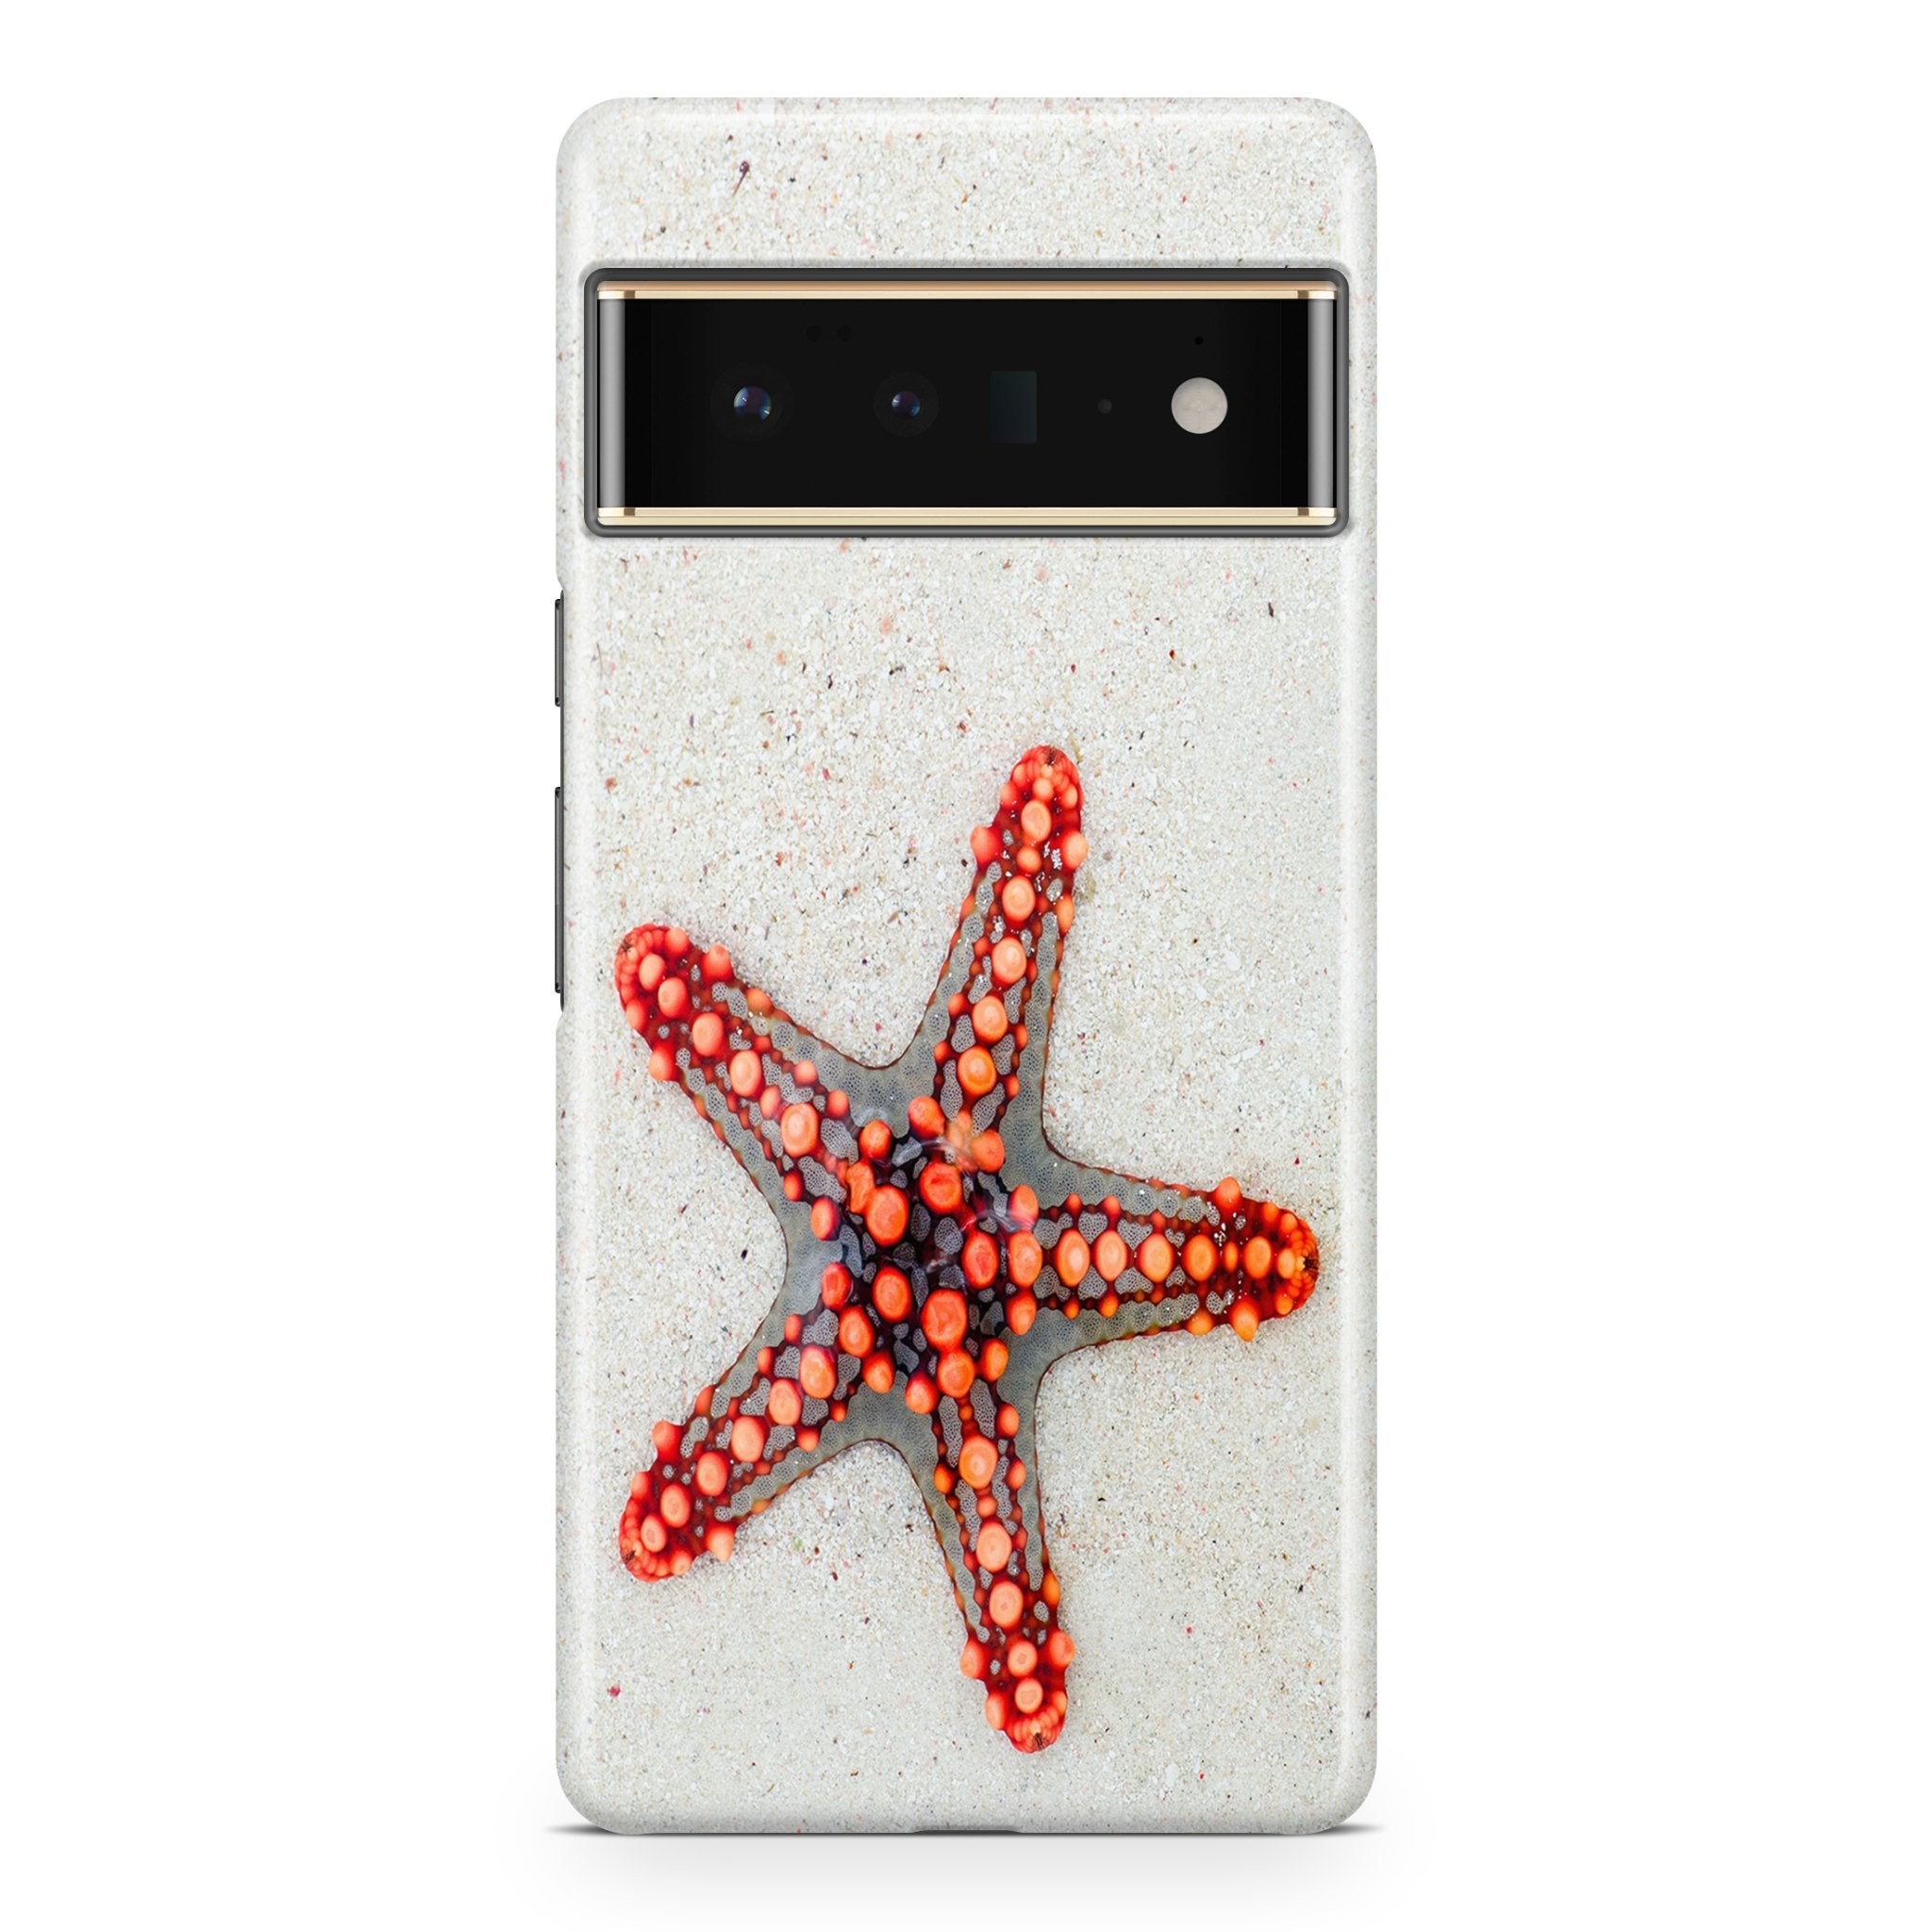 Red Starfish - Google phone case designs by CaseSwagger